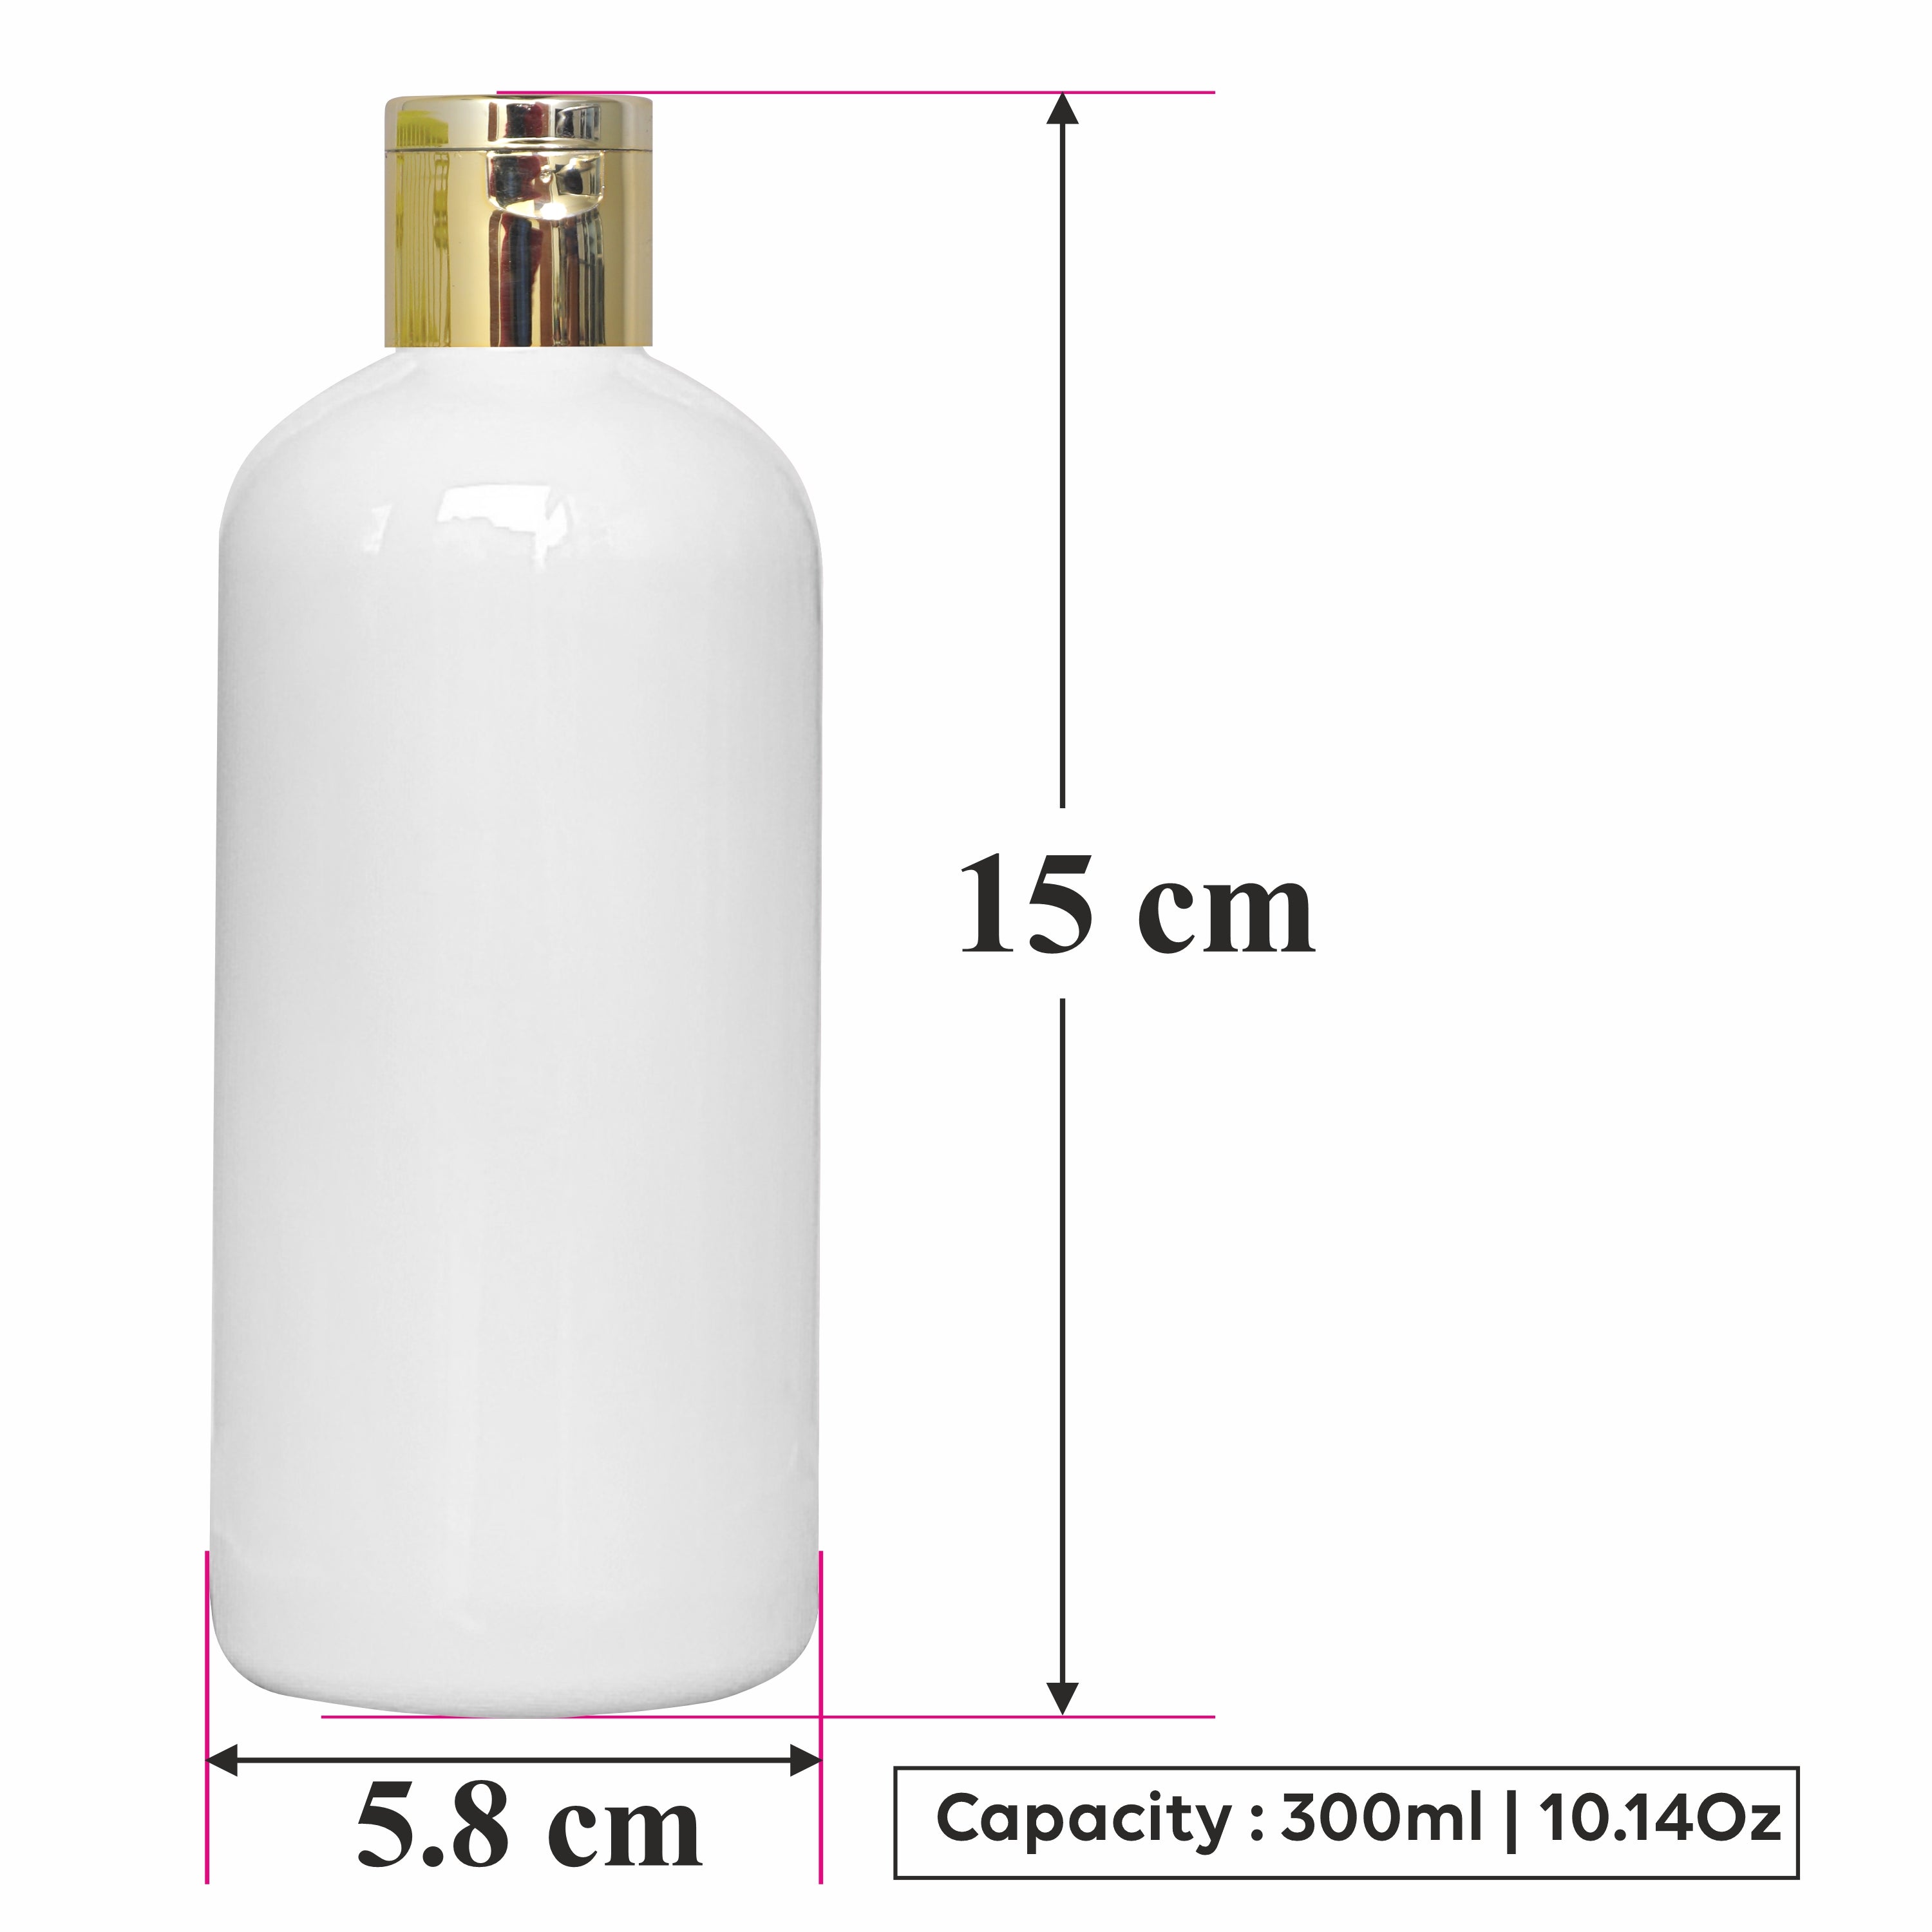 |ZMW75| MILKY WHITE ROUND SHAPE PET BOTTLE WITH GOLD PLATED FLIPTOP CAP Available Size: 300ml